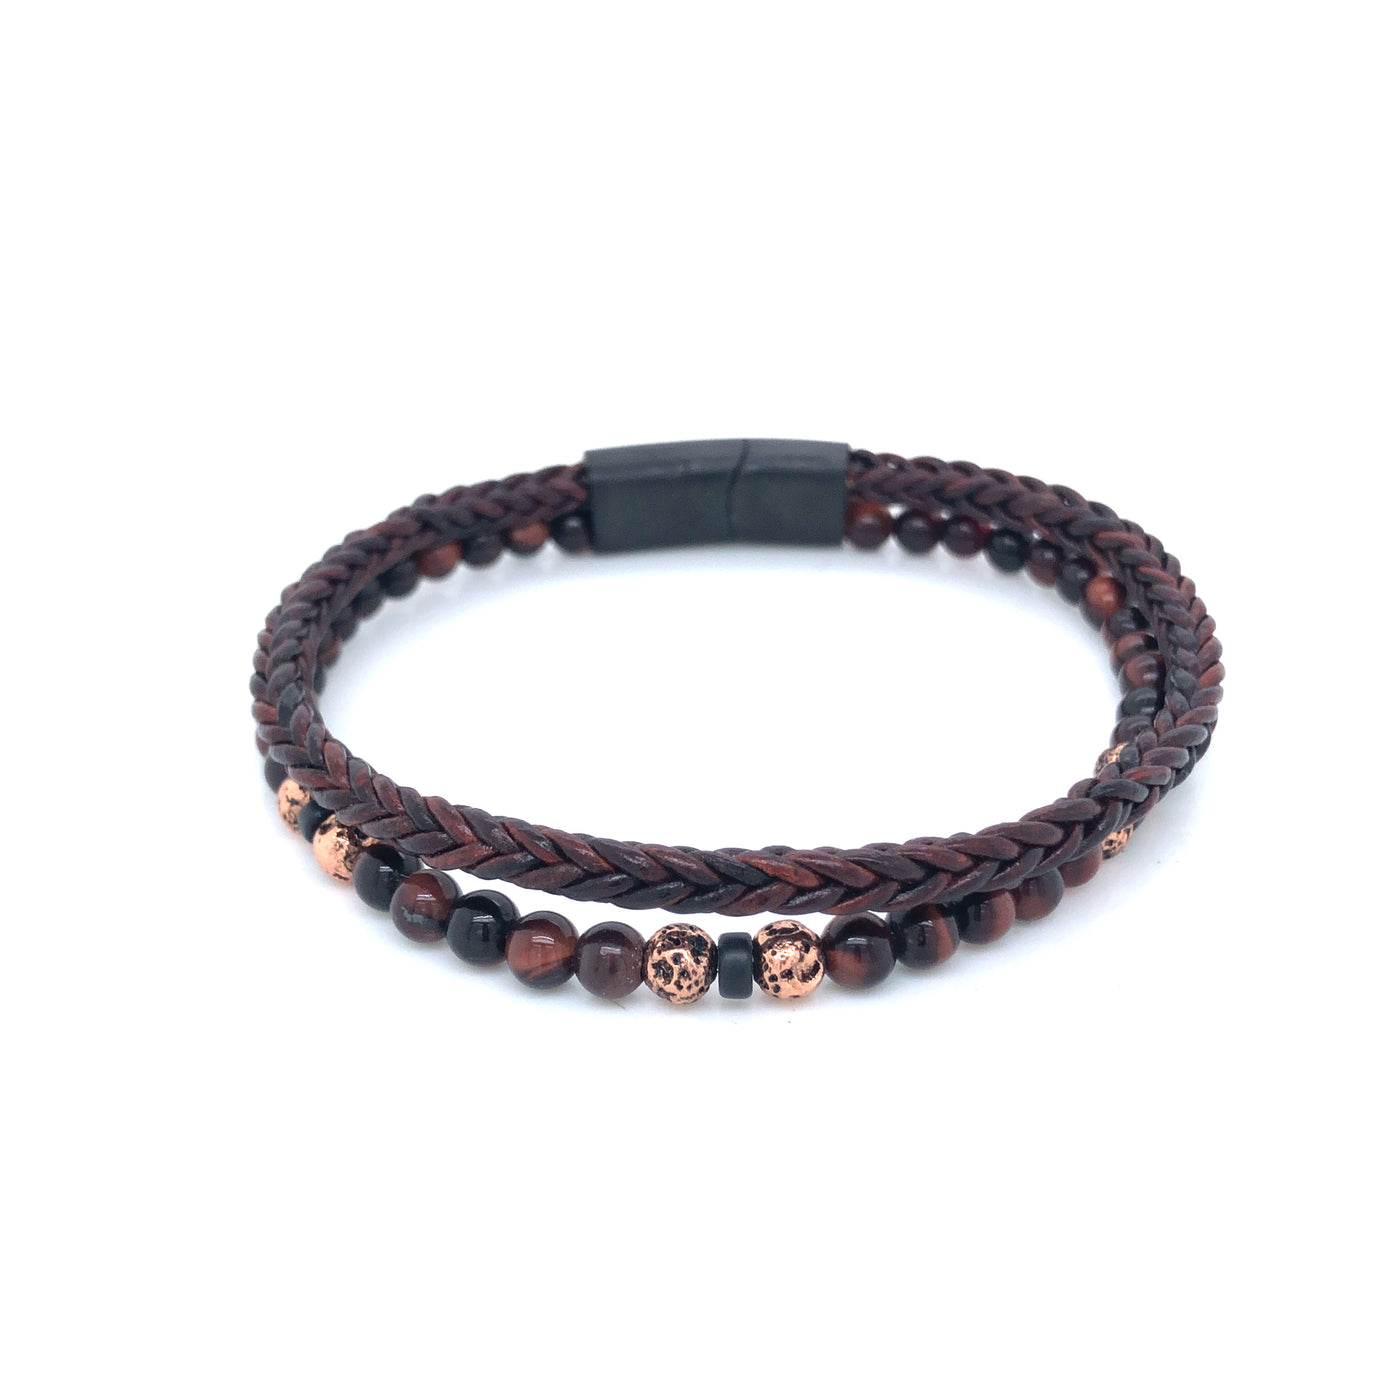 Double Strand Brown Leather Braided Bracelet WithTigers Eye Beads And Vintage Beads